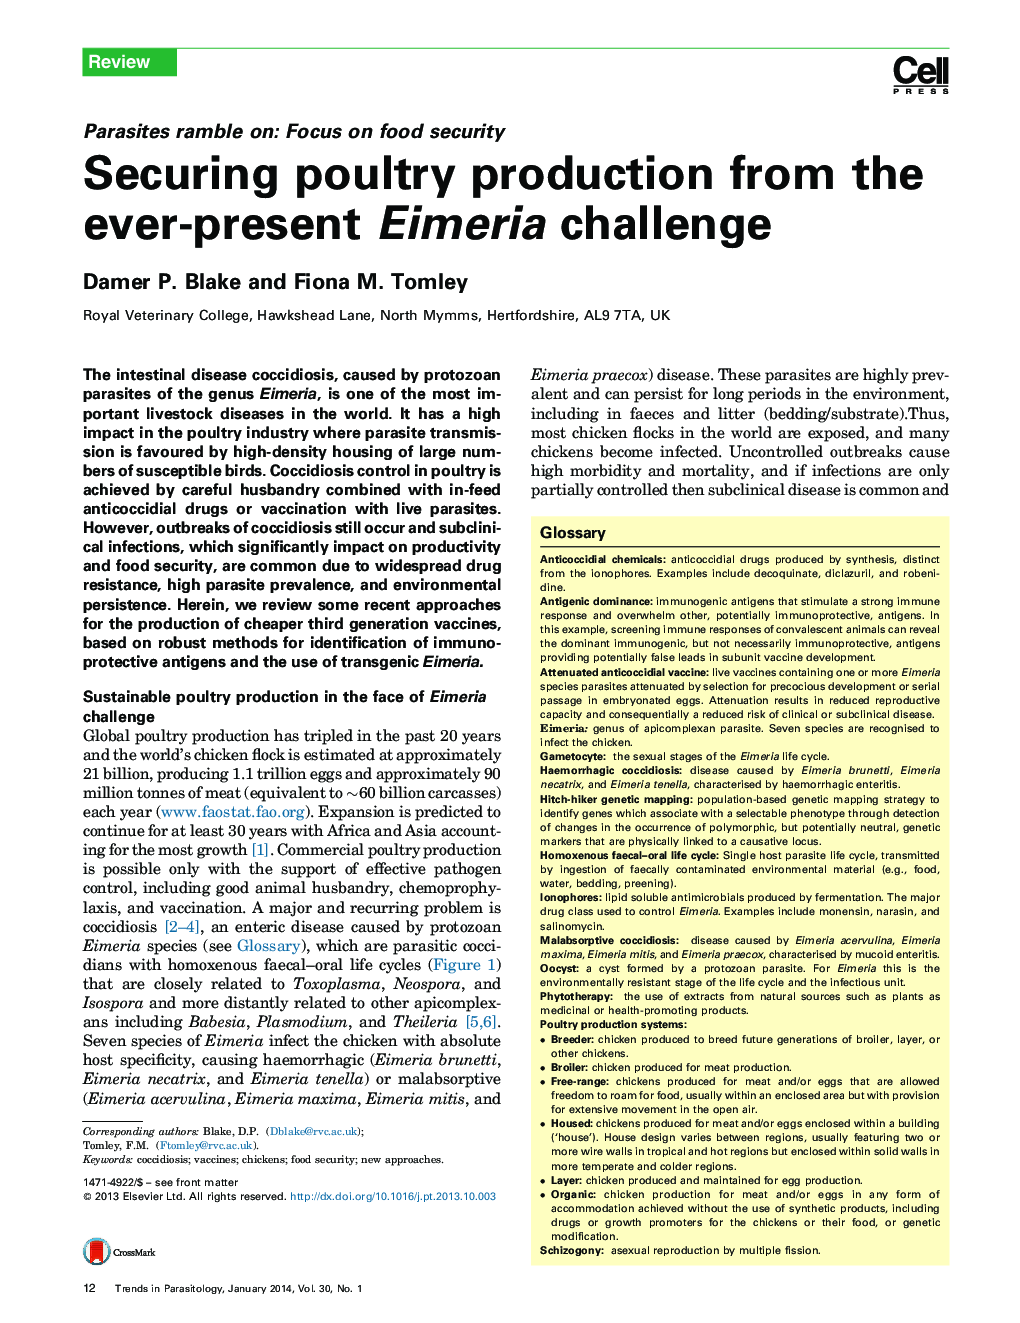 Securing poultry production from the ever-present Eimeria challenge